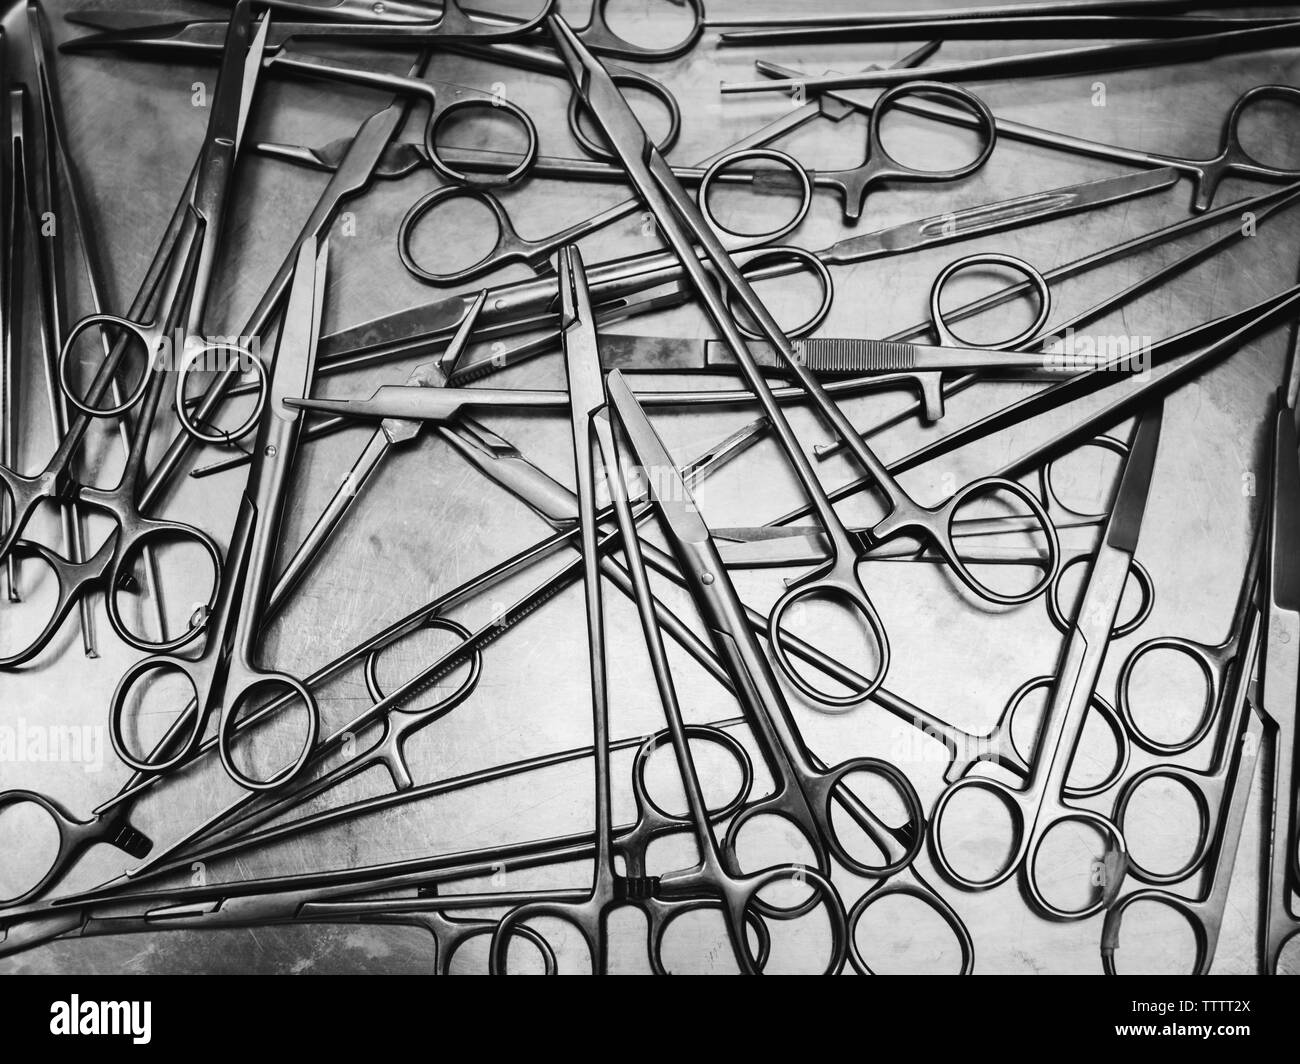 Surgical instruments black and white close-up Stock Photo